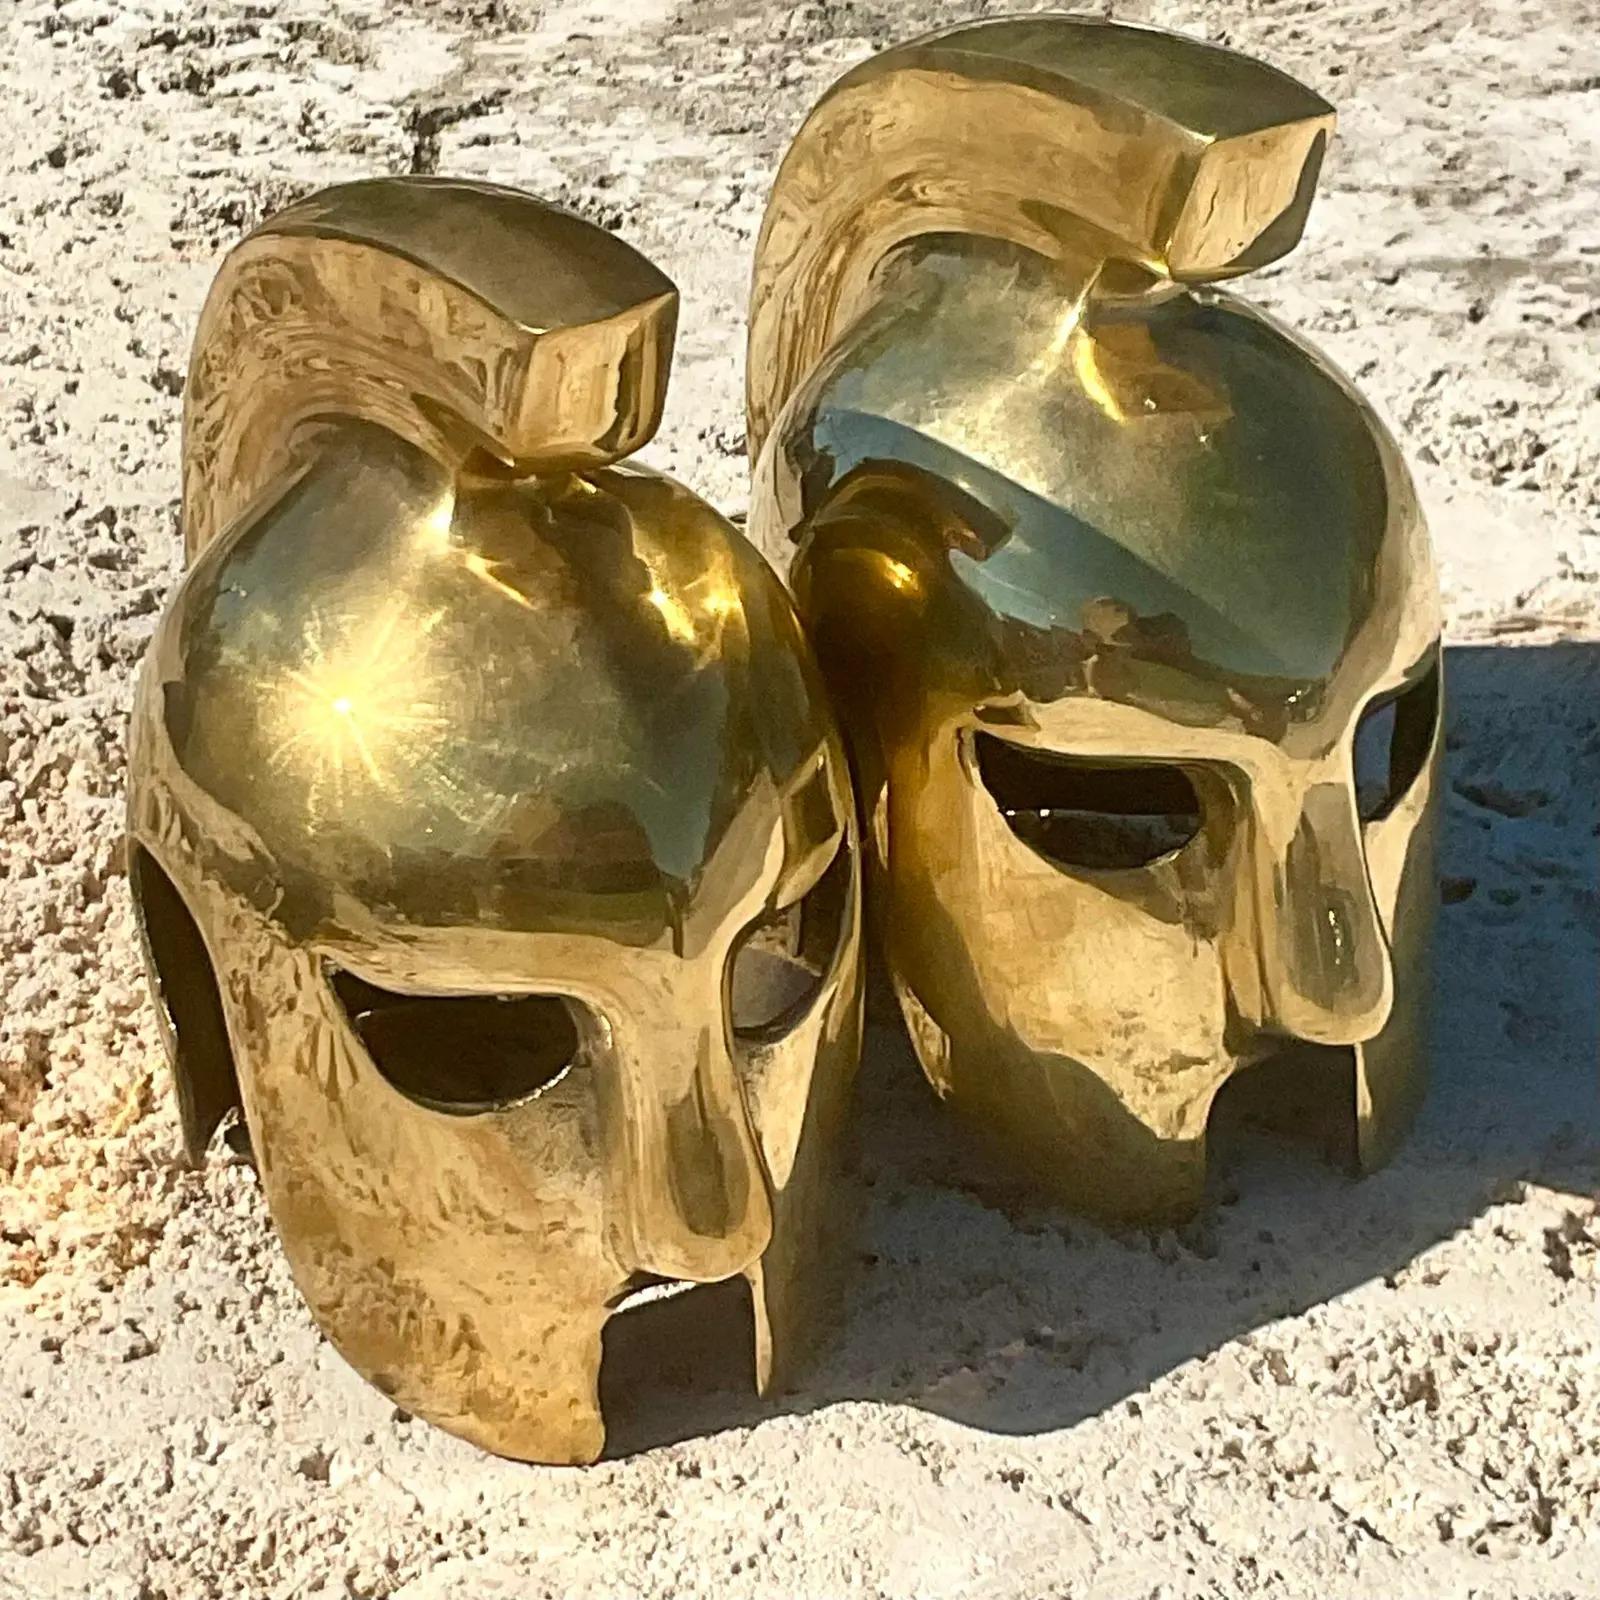 A fabulous pair of vintage Regency bookends. Chic brass gladiator helmets in a high polish finish. Acquired from a Palm Beach estate.